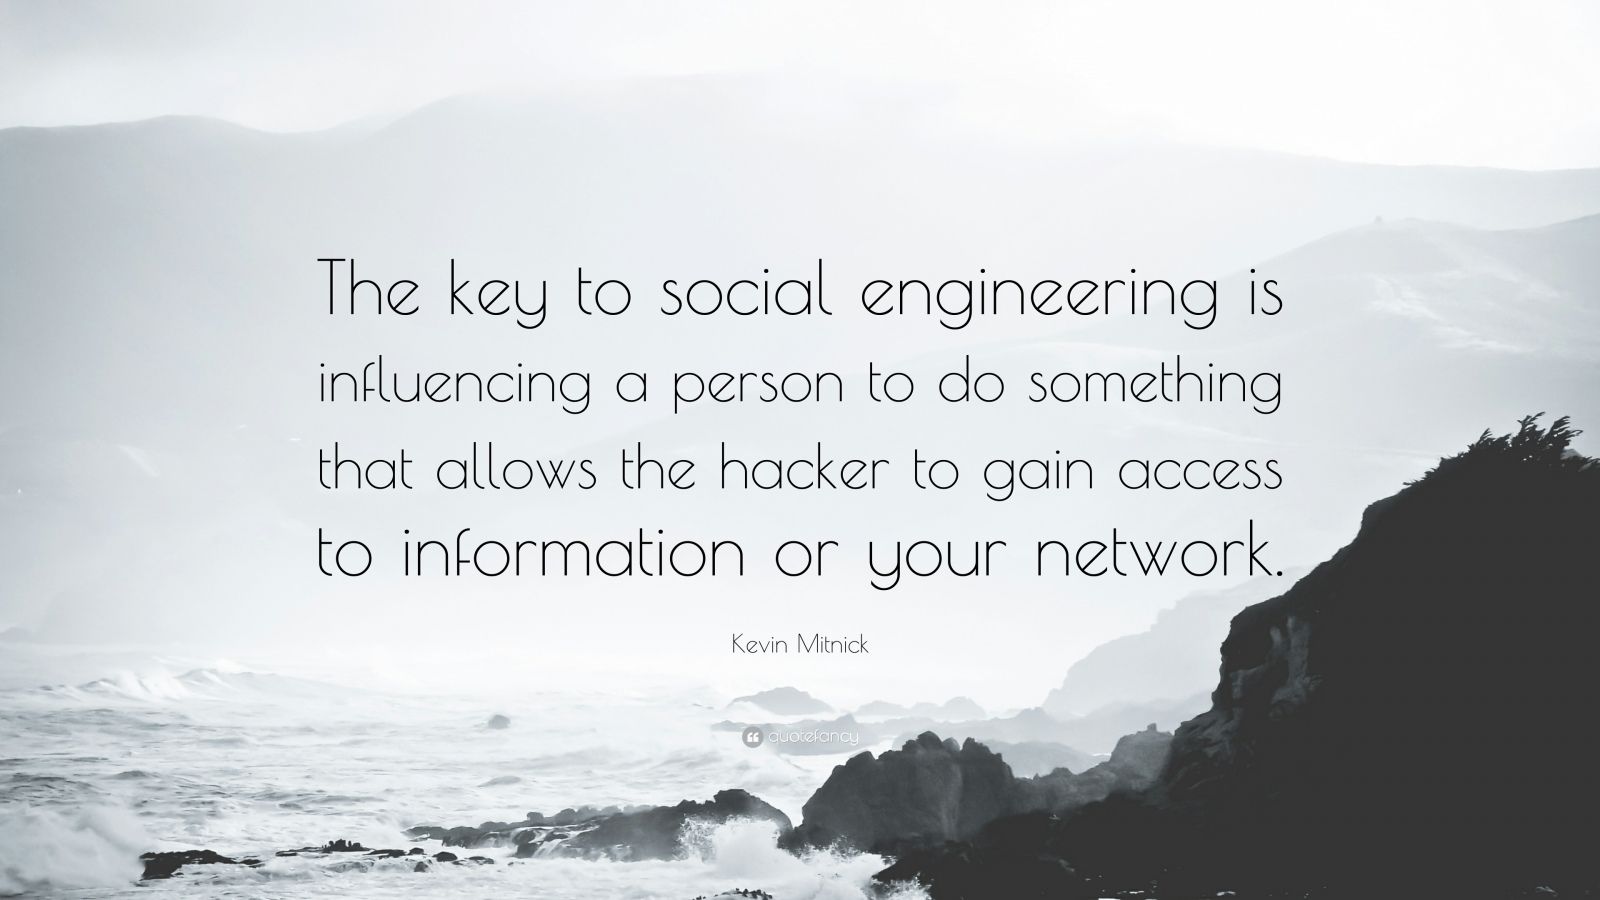 Kevin Mitnick Quote “The key to social engineering is influencing a